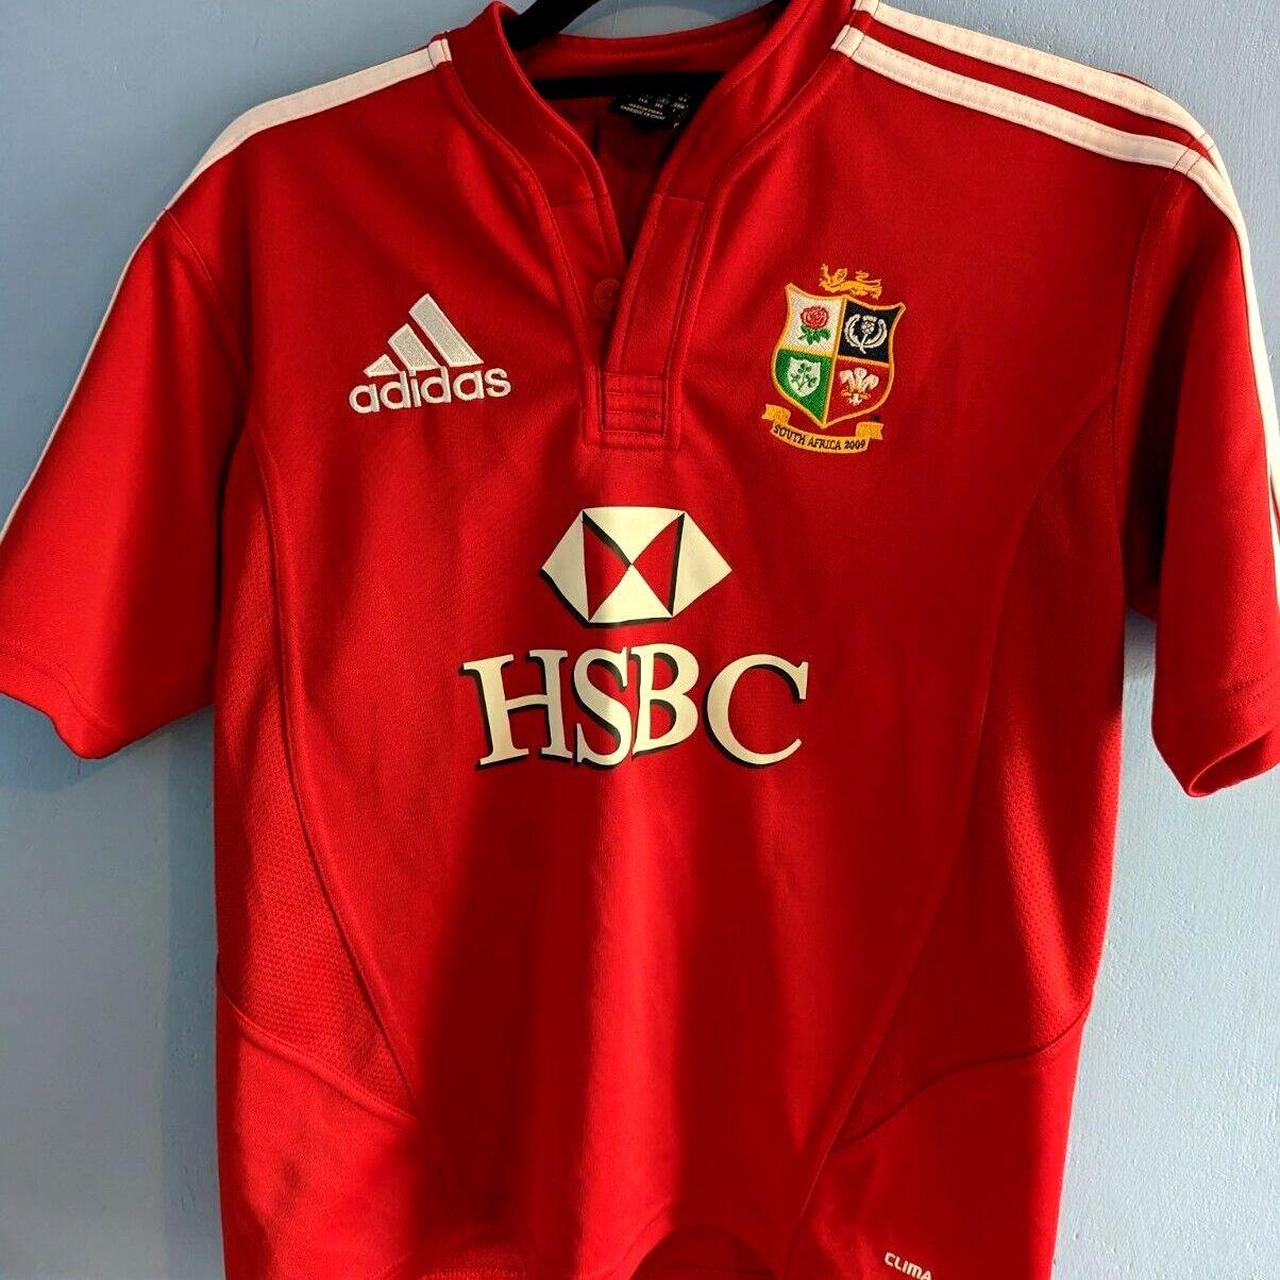 British Lions 2009 South Africa Red HSBC Top Boys... - Depop